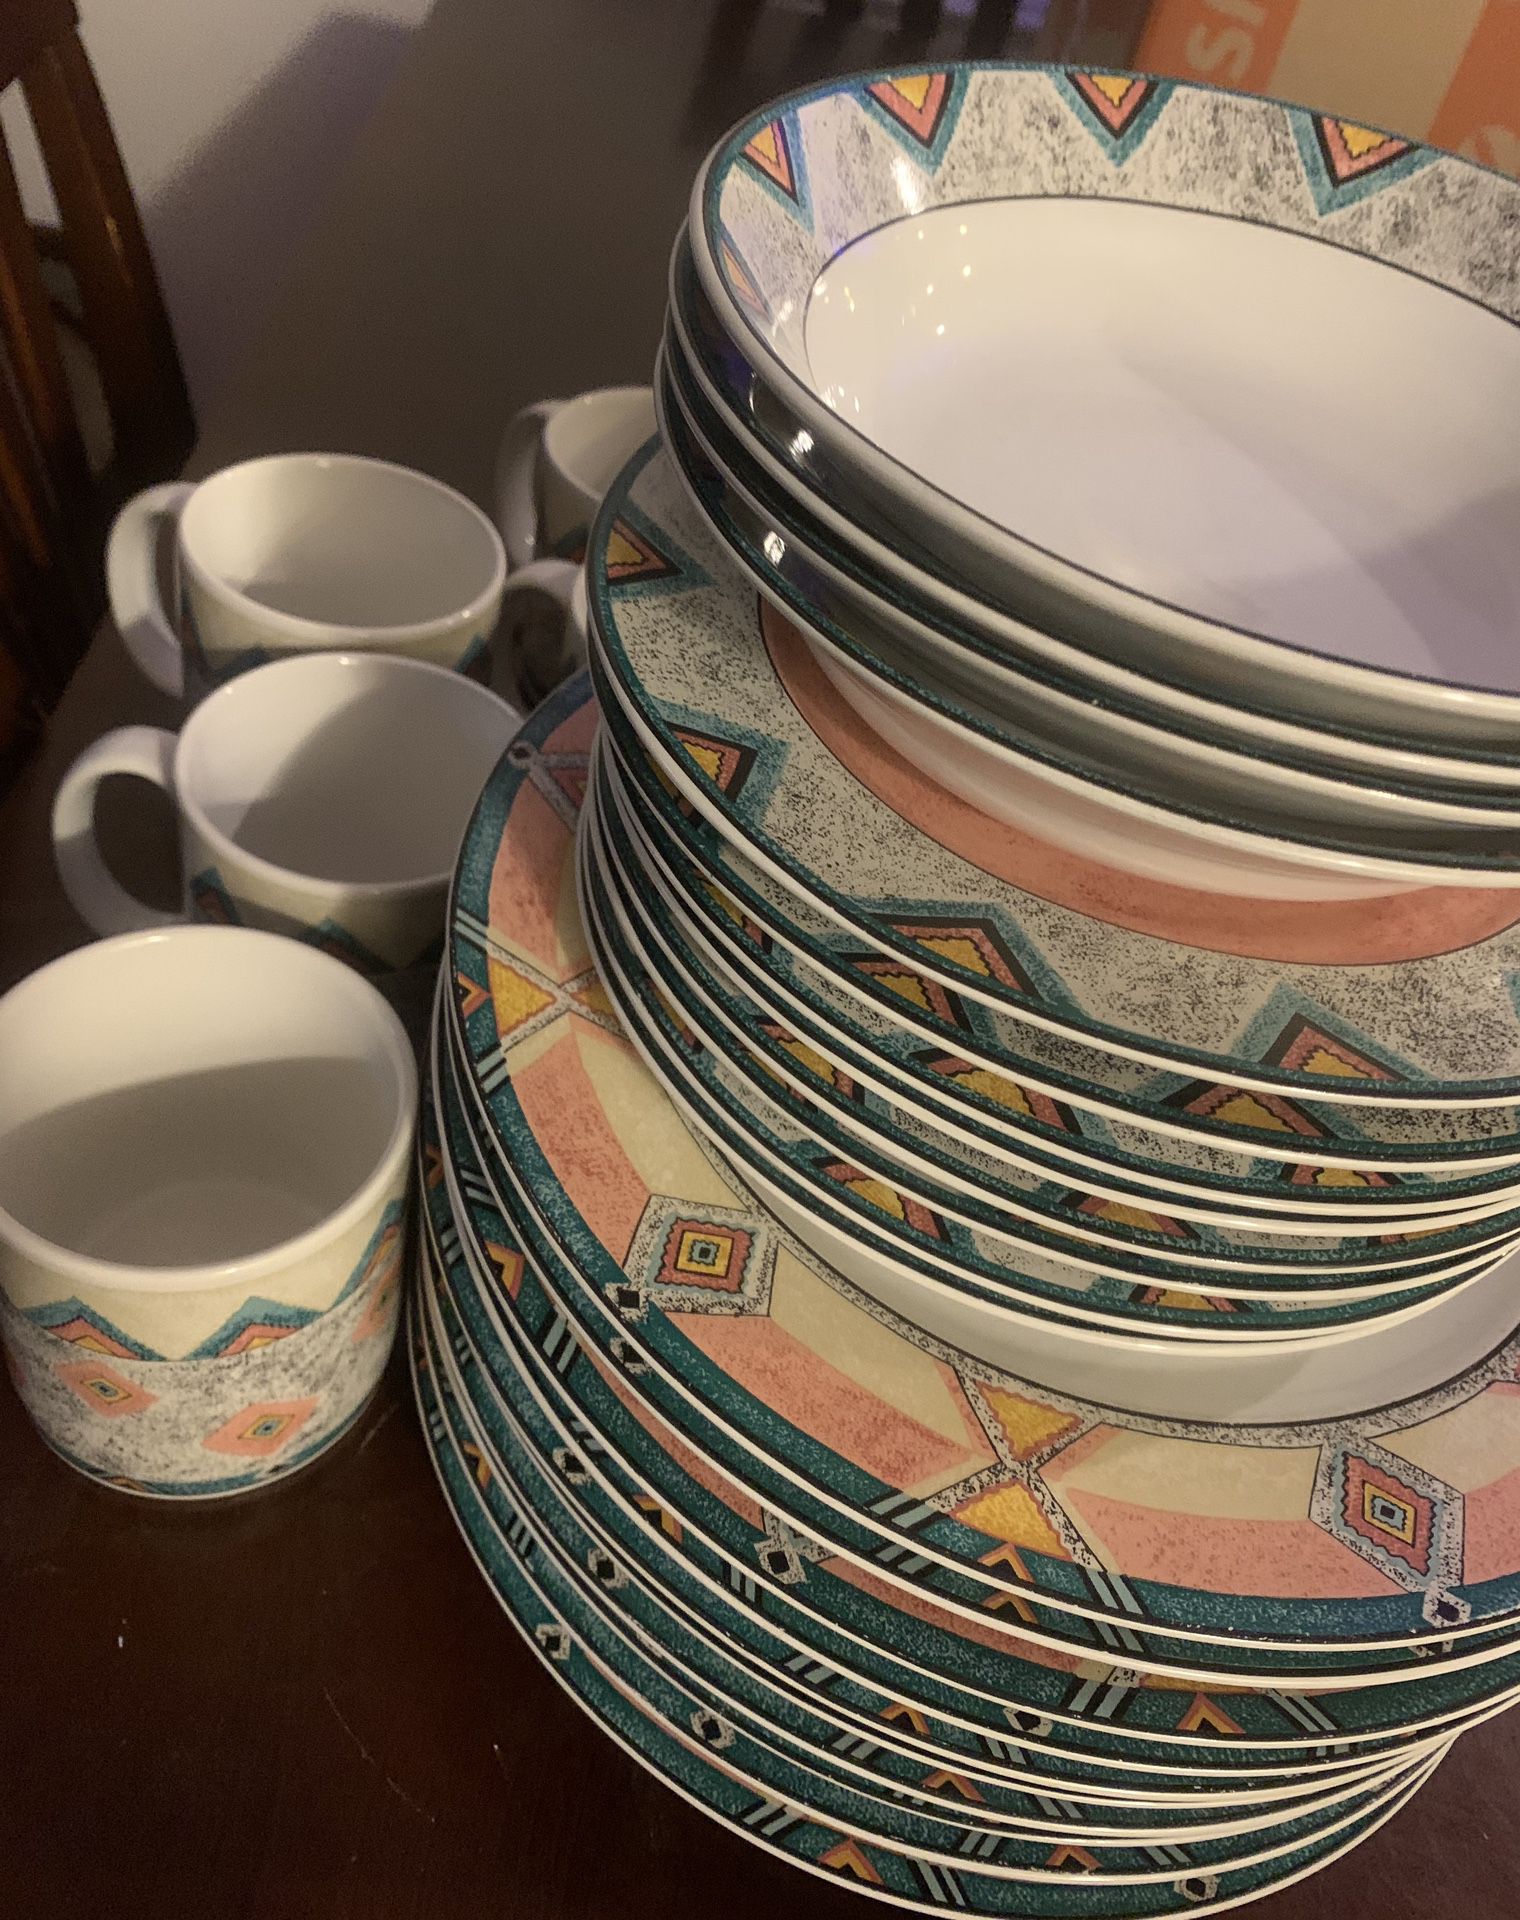 Southwestern Dishes (not a complete set)